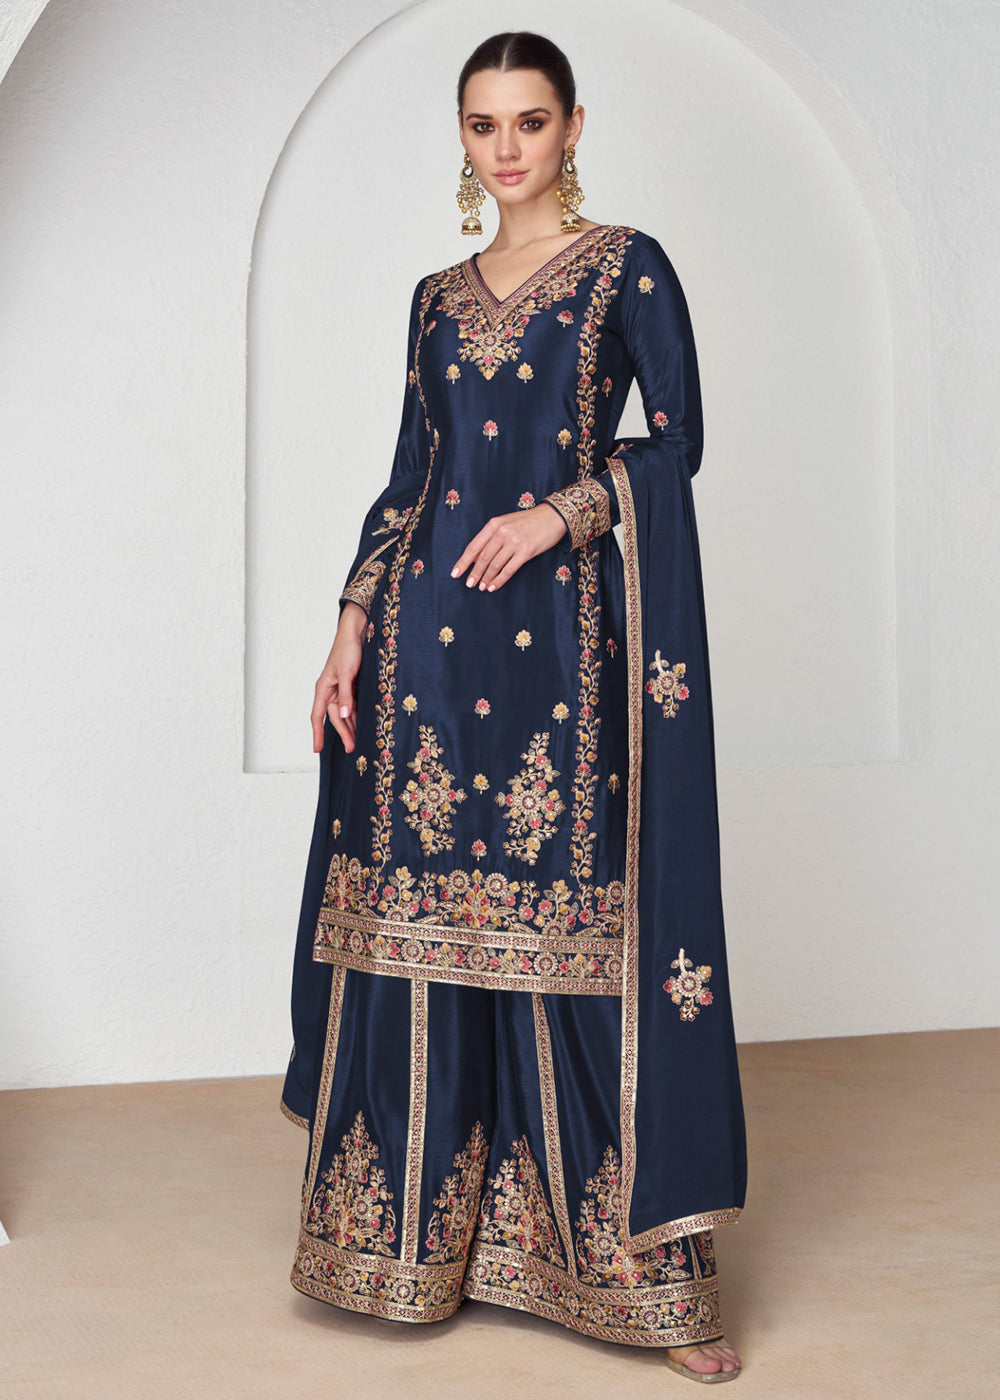 Buy Now Palazzo Style Premium Chinnon Silk Navy Blue Festive Suit Online in USA, UK, Canada, Germany, Australia & Worldwide at Empress Clothing.